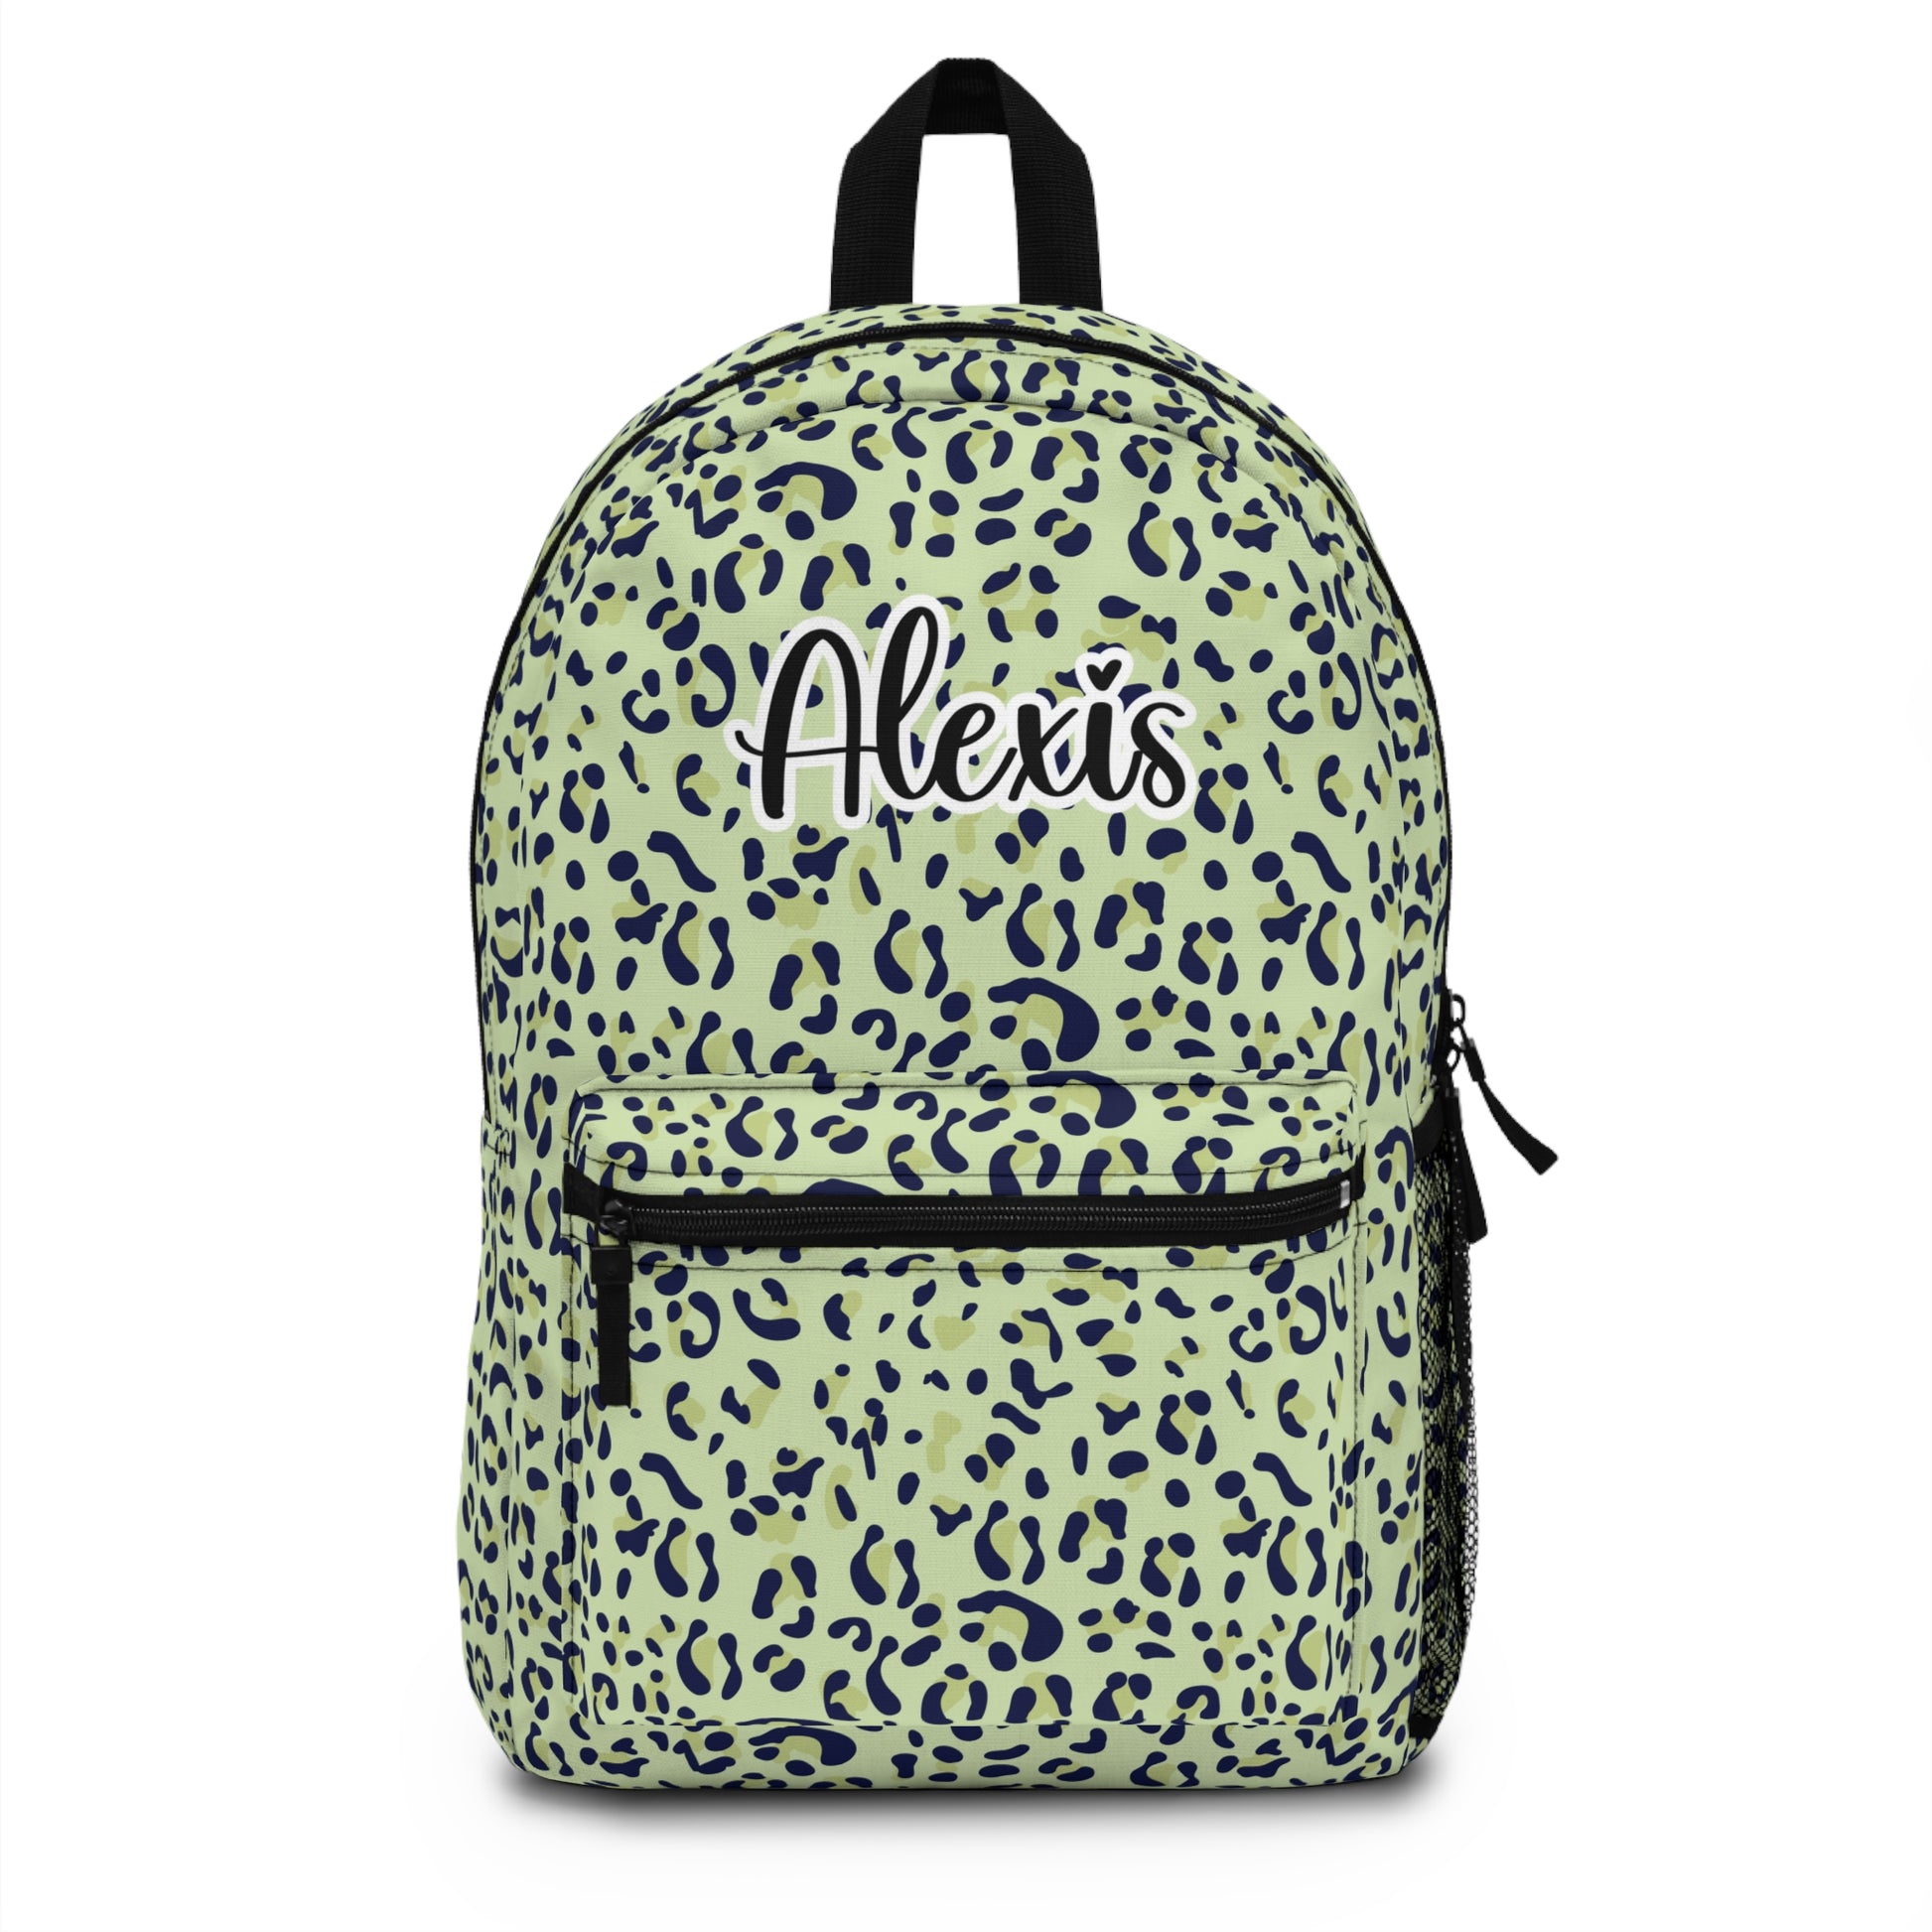 girls personalized green leopard print backpack for back to school or college